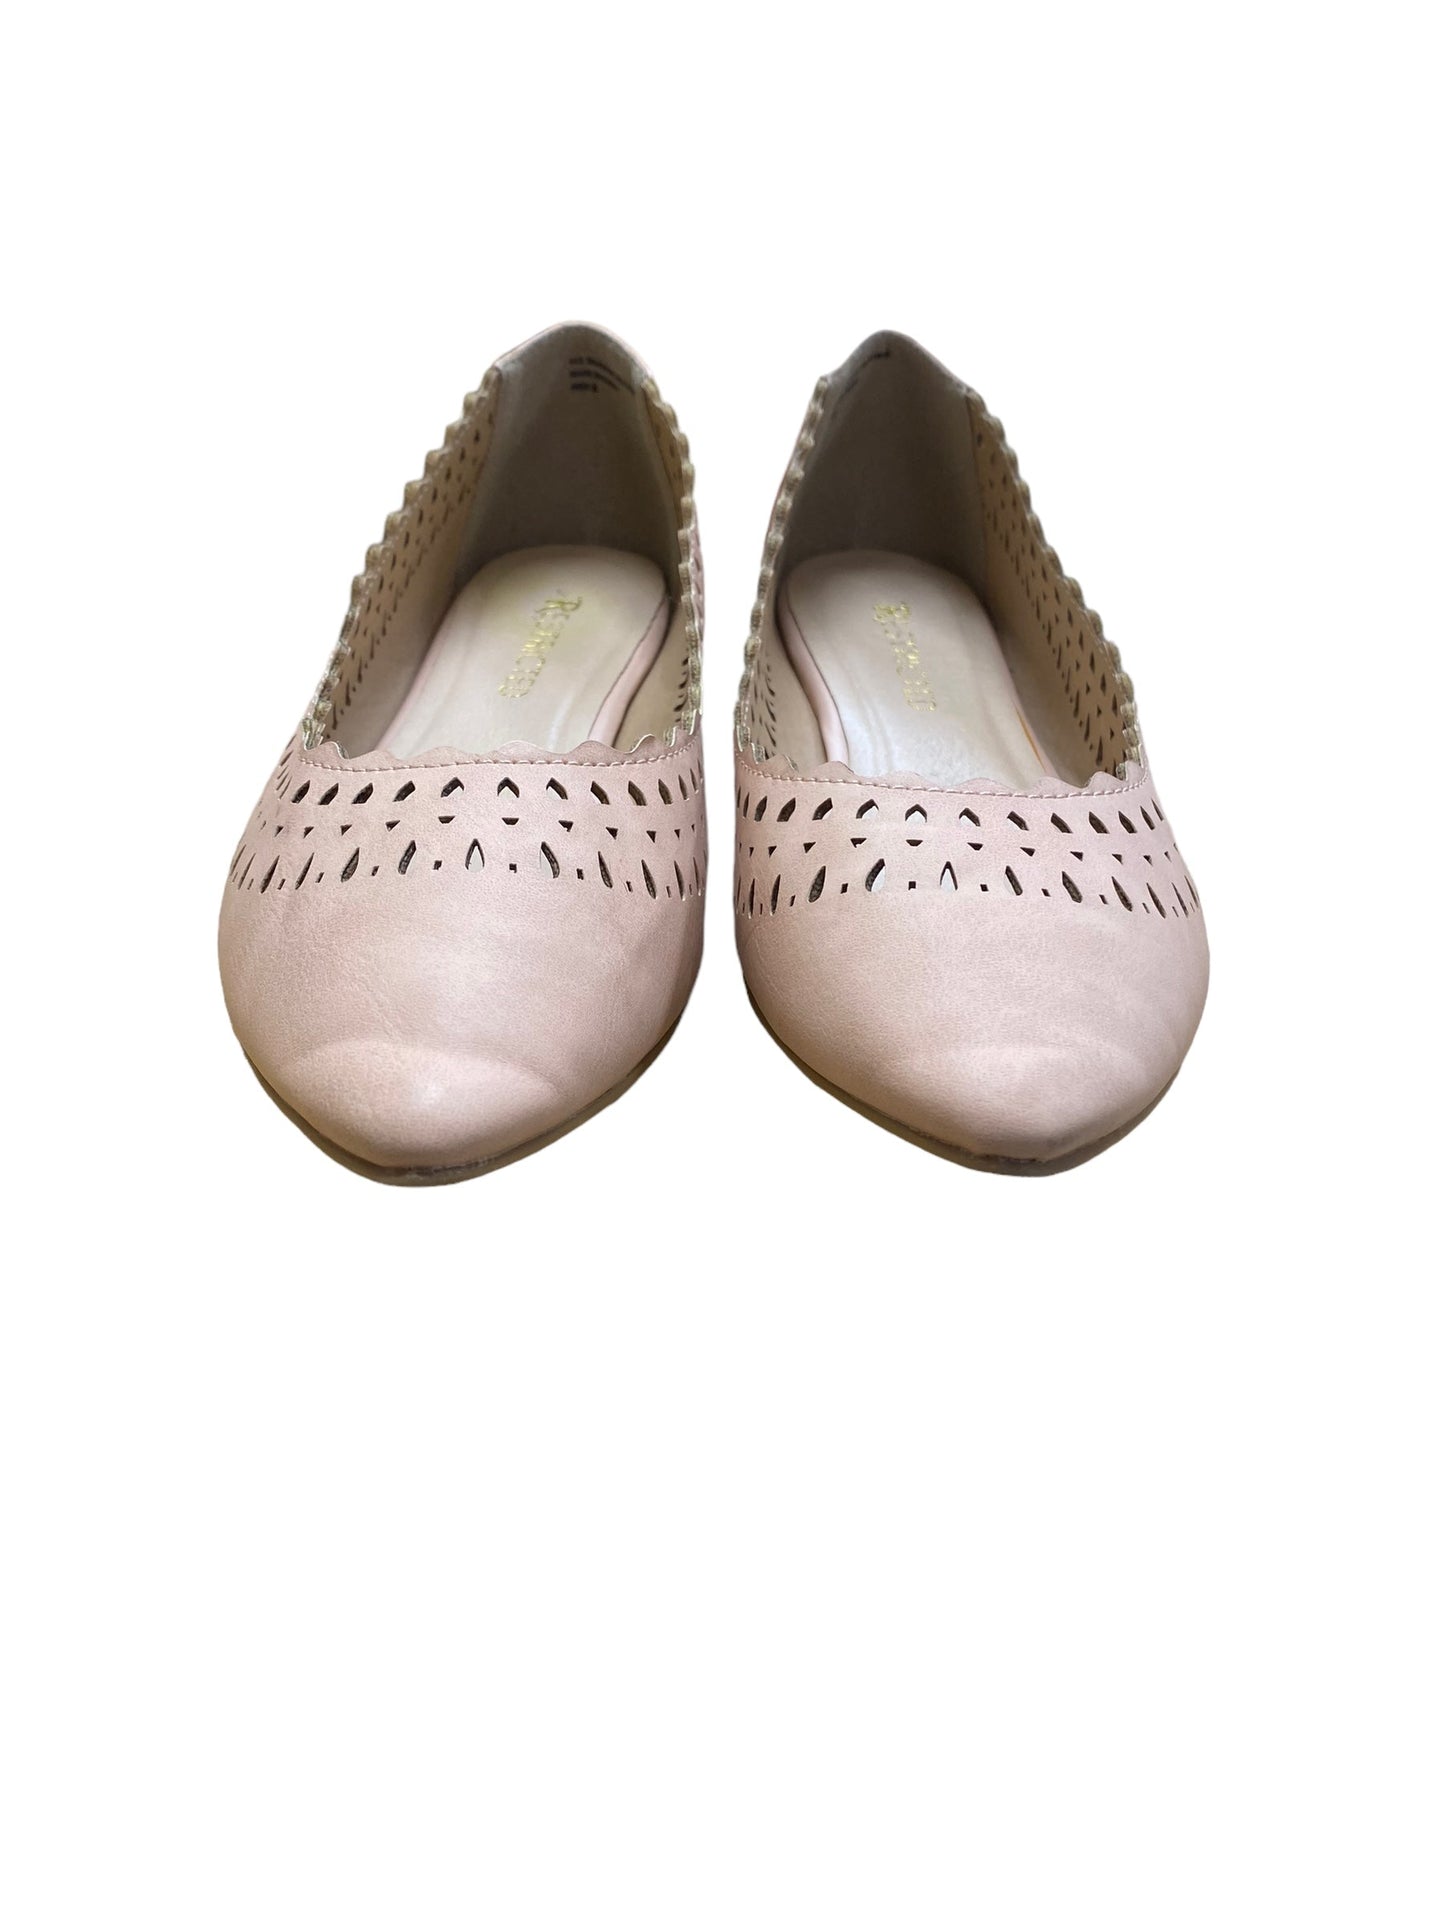 Shoes Flats By Restricted  Size: 8